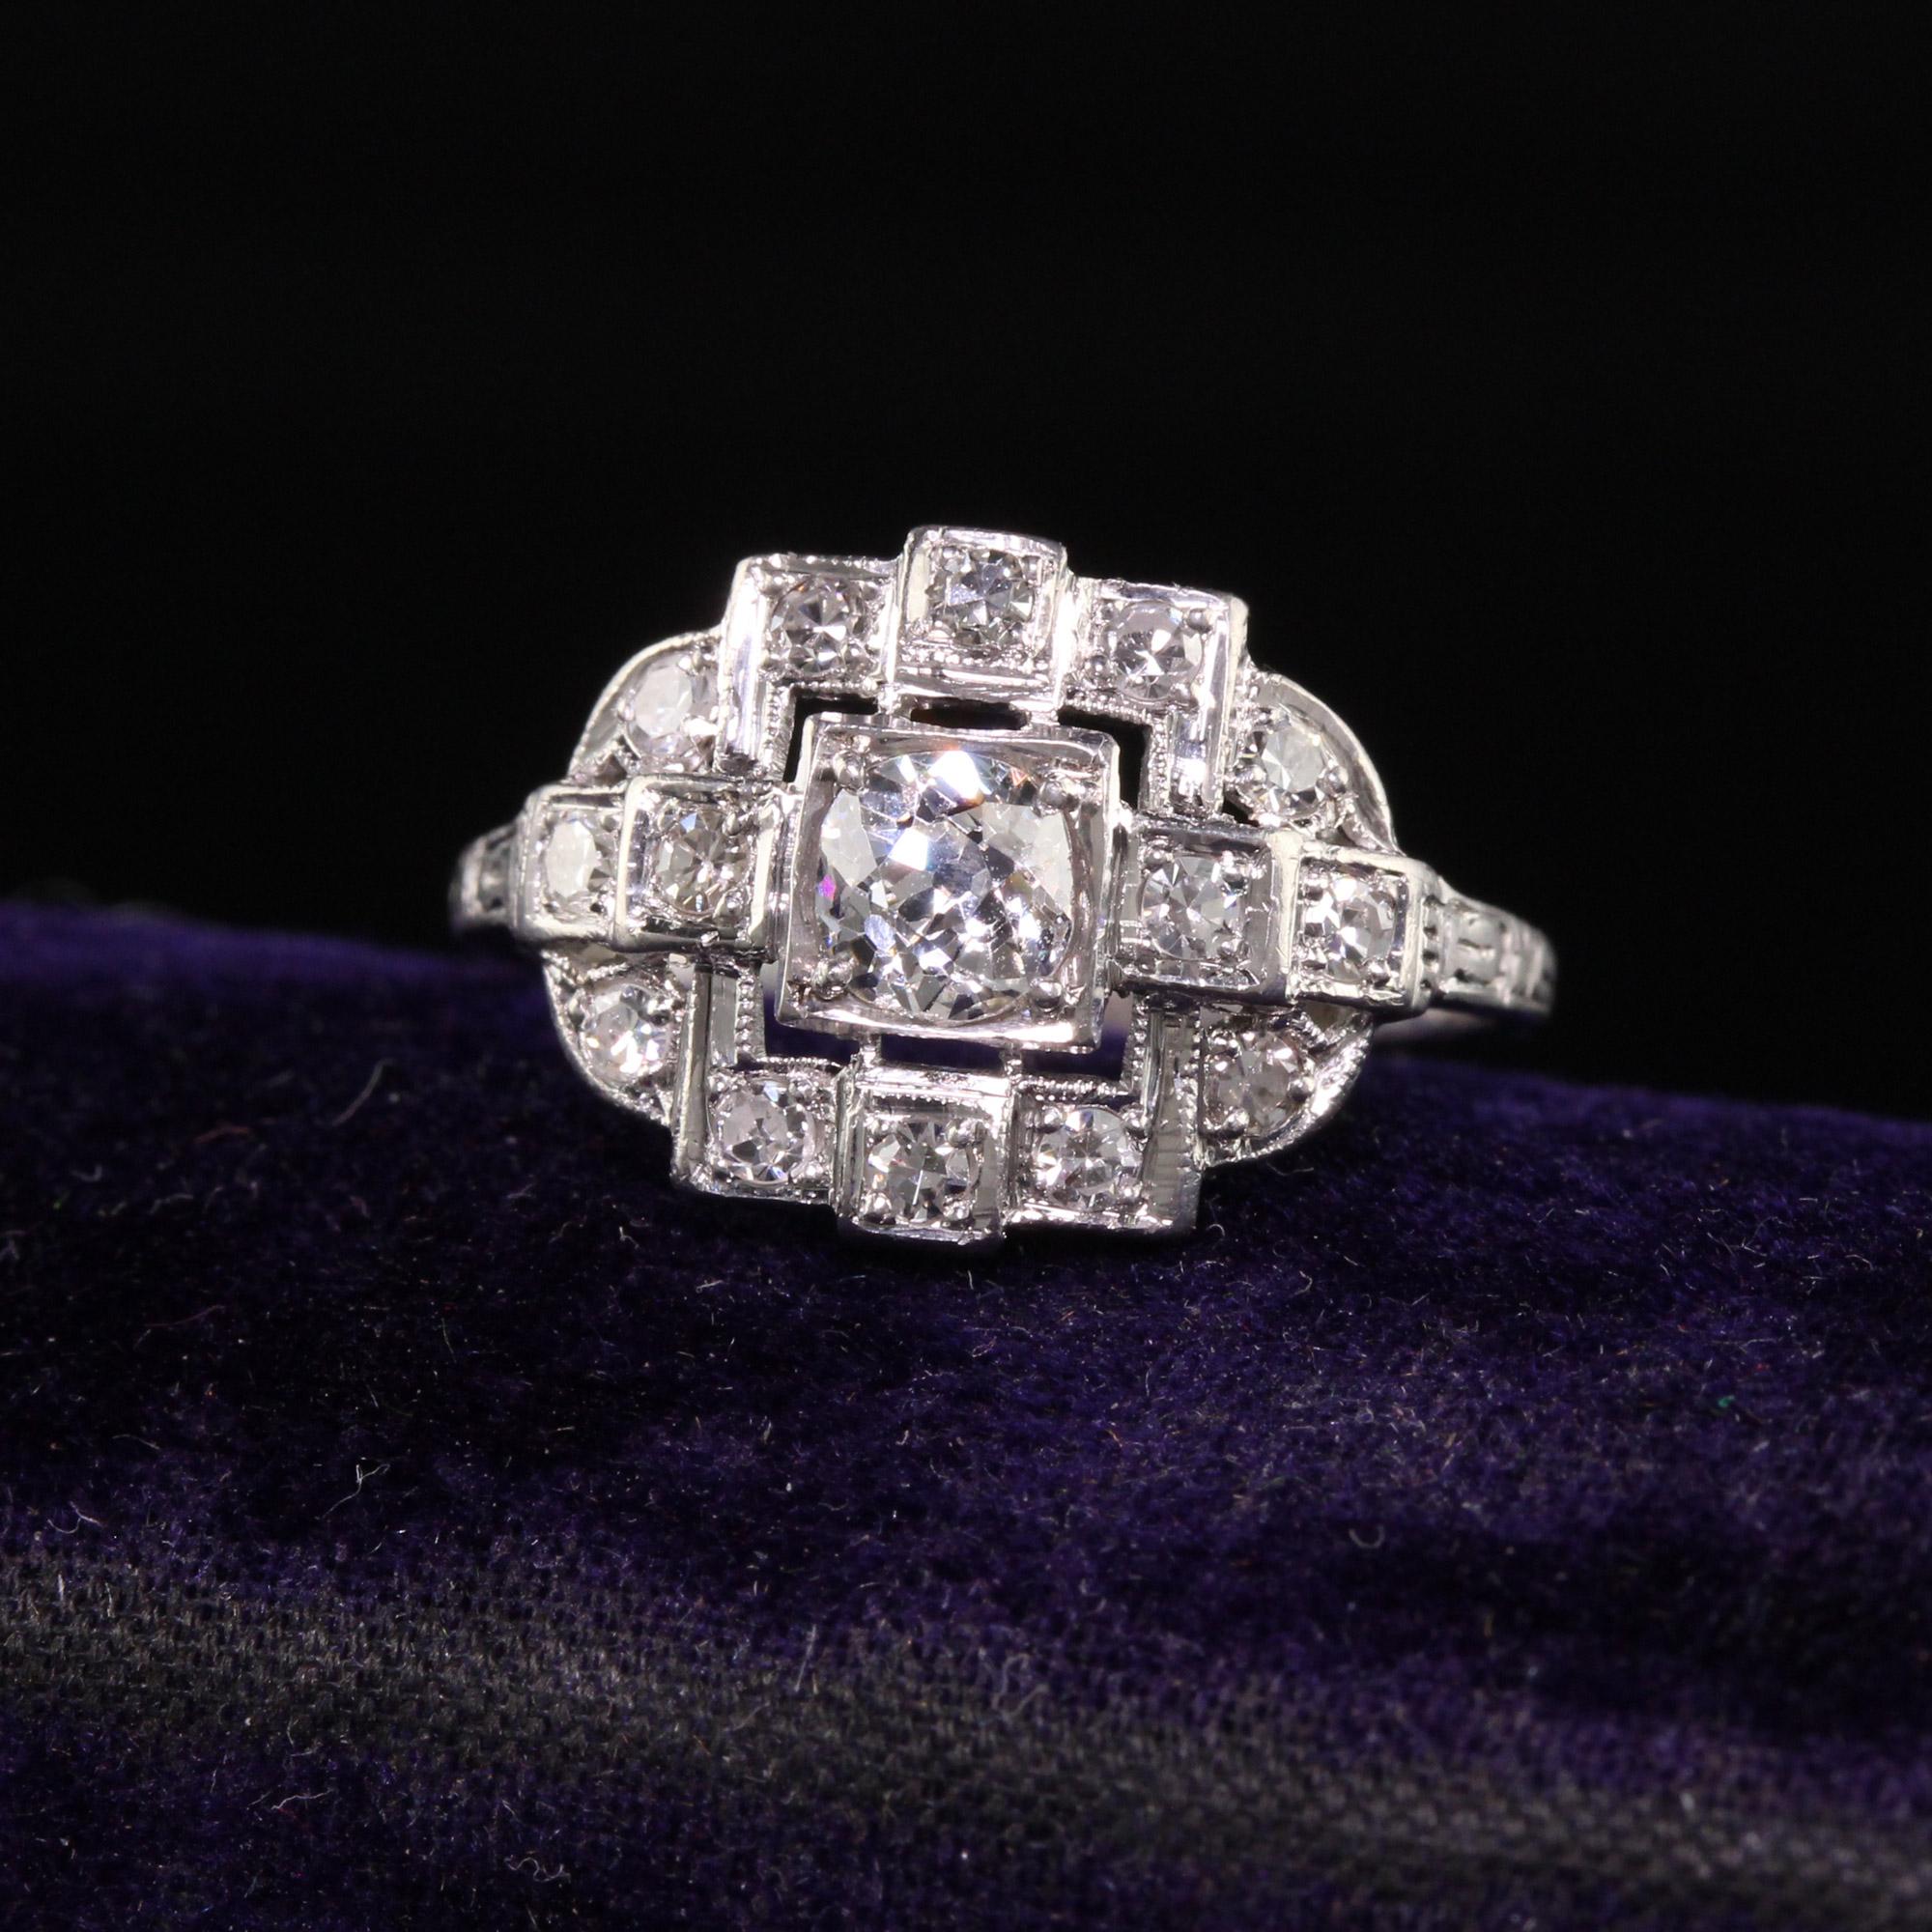 Beautiful Antique Art Deco Platinum Old European Cut Diamond Filigree Ring. This beautiful ring is crafted in platinum. The ring has old european cut diamonds set in a beautiful art deco mounting and is in great condition.

Item #R1420

Metal: